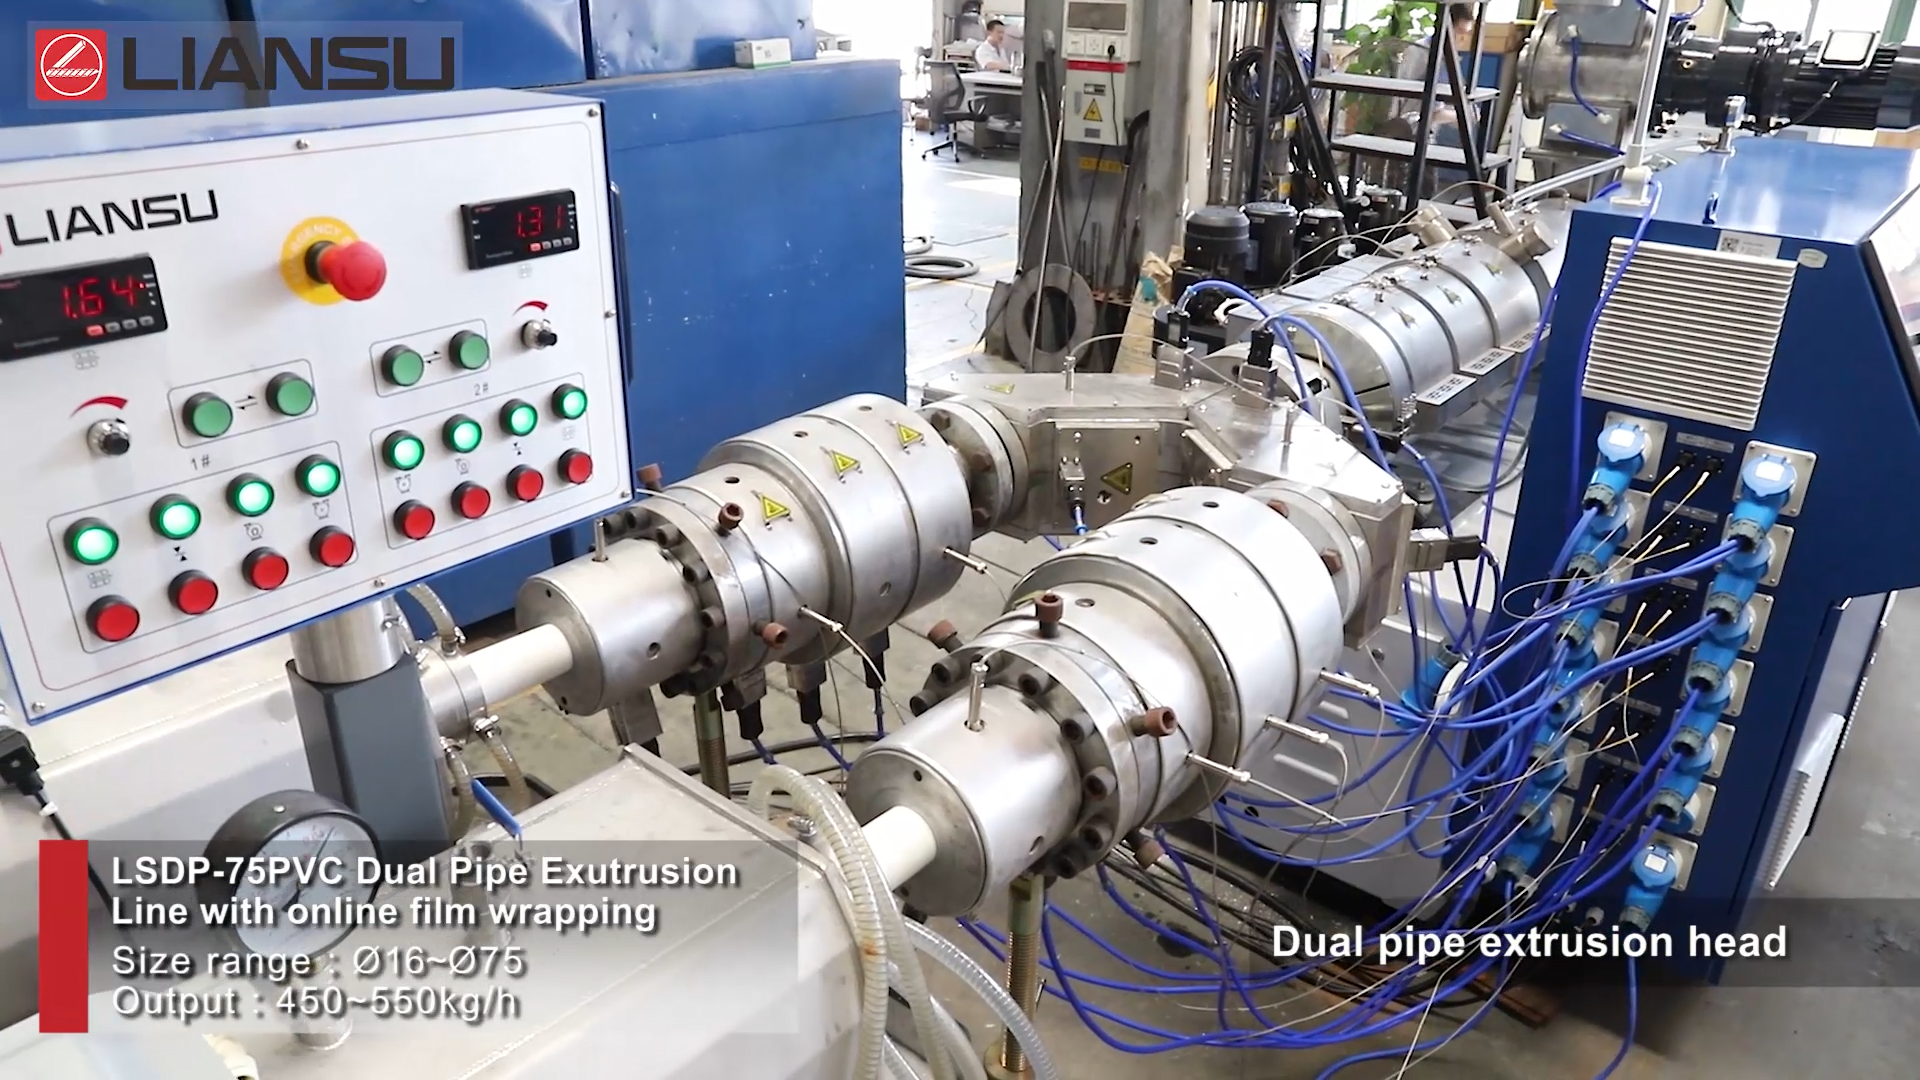 LSDP-75PVC Dual Pipe Exutrusion Line with online film wrapping